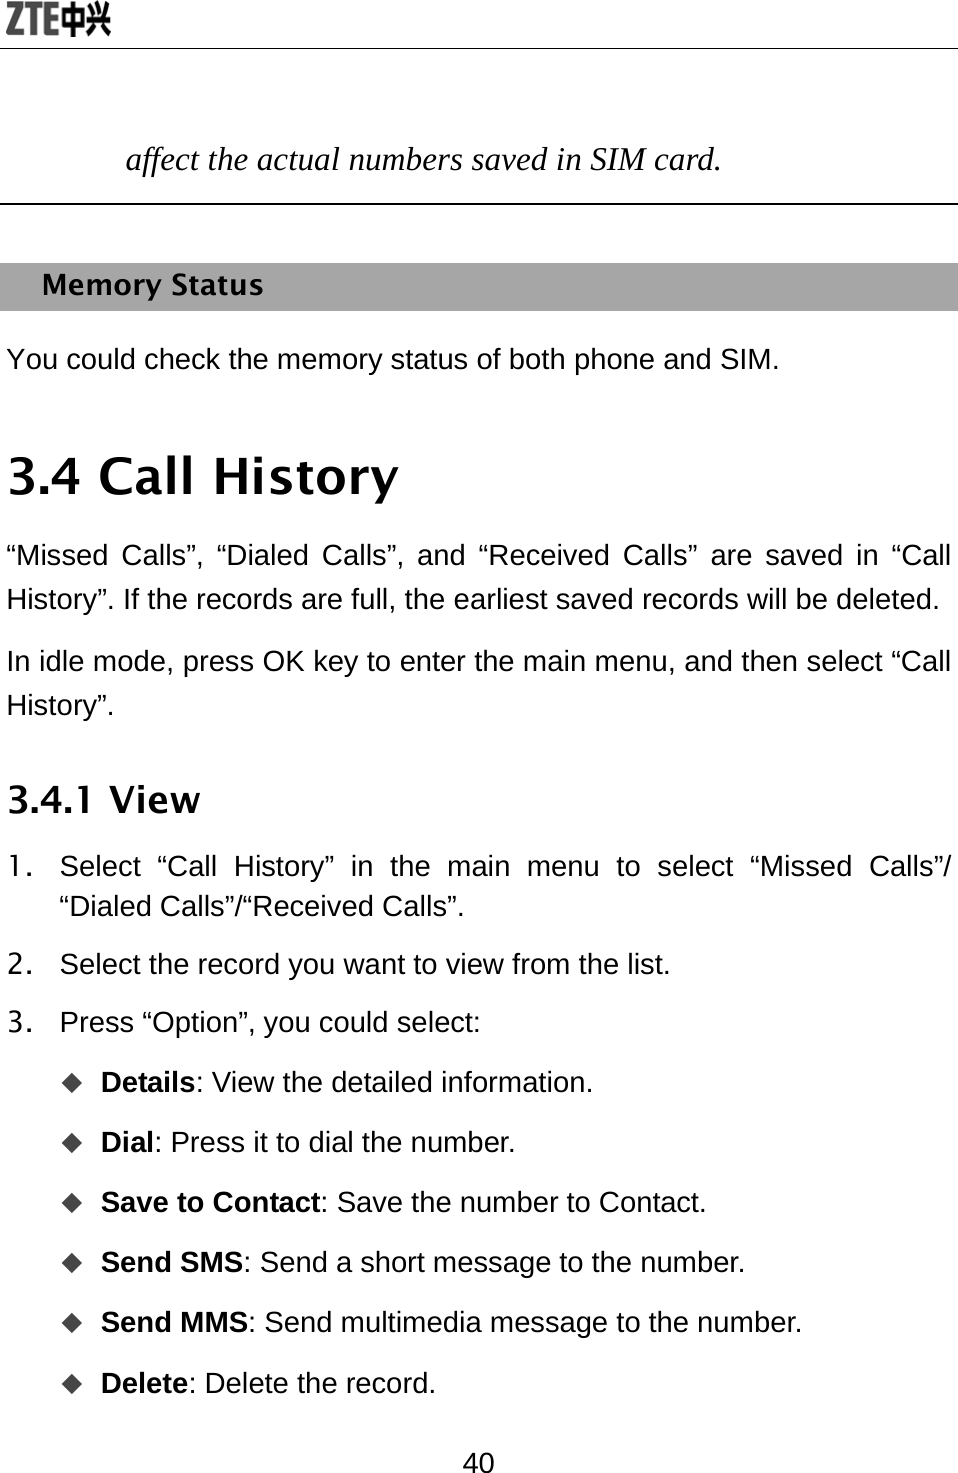  40 affect the actual numbers saved in SIM card.  Memory Status You could check the memory status of both phone and SIM. 3.4 Call History “Missed Calls”, “Dialed Calls”, and “Received Calls” are saved in “Call History”. If the records are full, the earliest saved records will be deleted. In idle mode, press OK key to enter the main menu, and then select “Call History”.  3.4.1 View 1.  Select “Call History” in the main menu to select “Missed Calls”/ “Dialed Calls”/“Received Calls”. 2.  Select the record you want to view from the list. 3. Press “Option”, you could select:  Details: View the detailed information.    Dial: Press it to dial the number.  Save to Contact: Save the number to Contact.    Send SMS: Send a short message to the number.    Send MMS: Send multimedia message to the number.    Delete: Delete the record.   